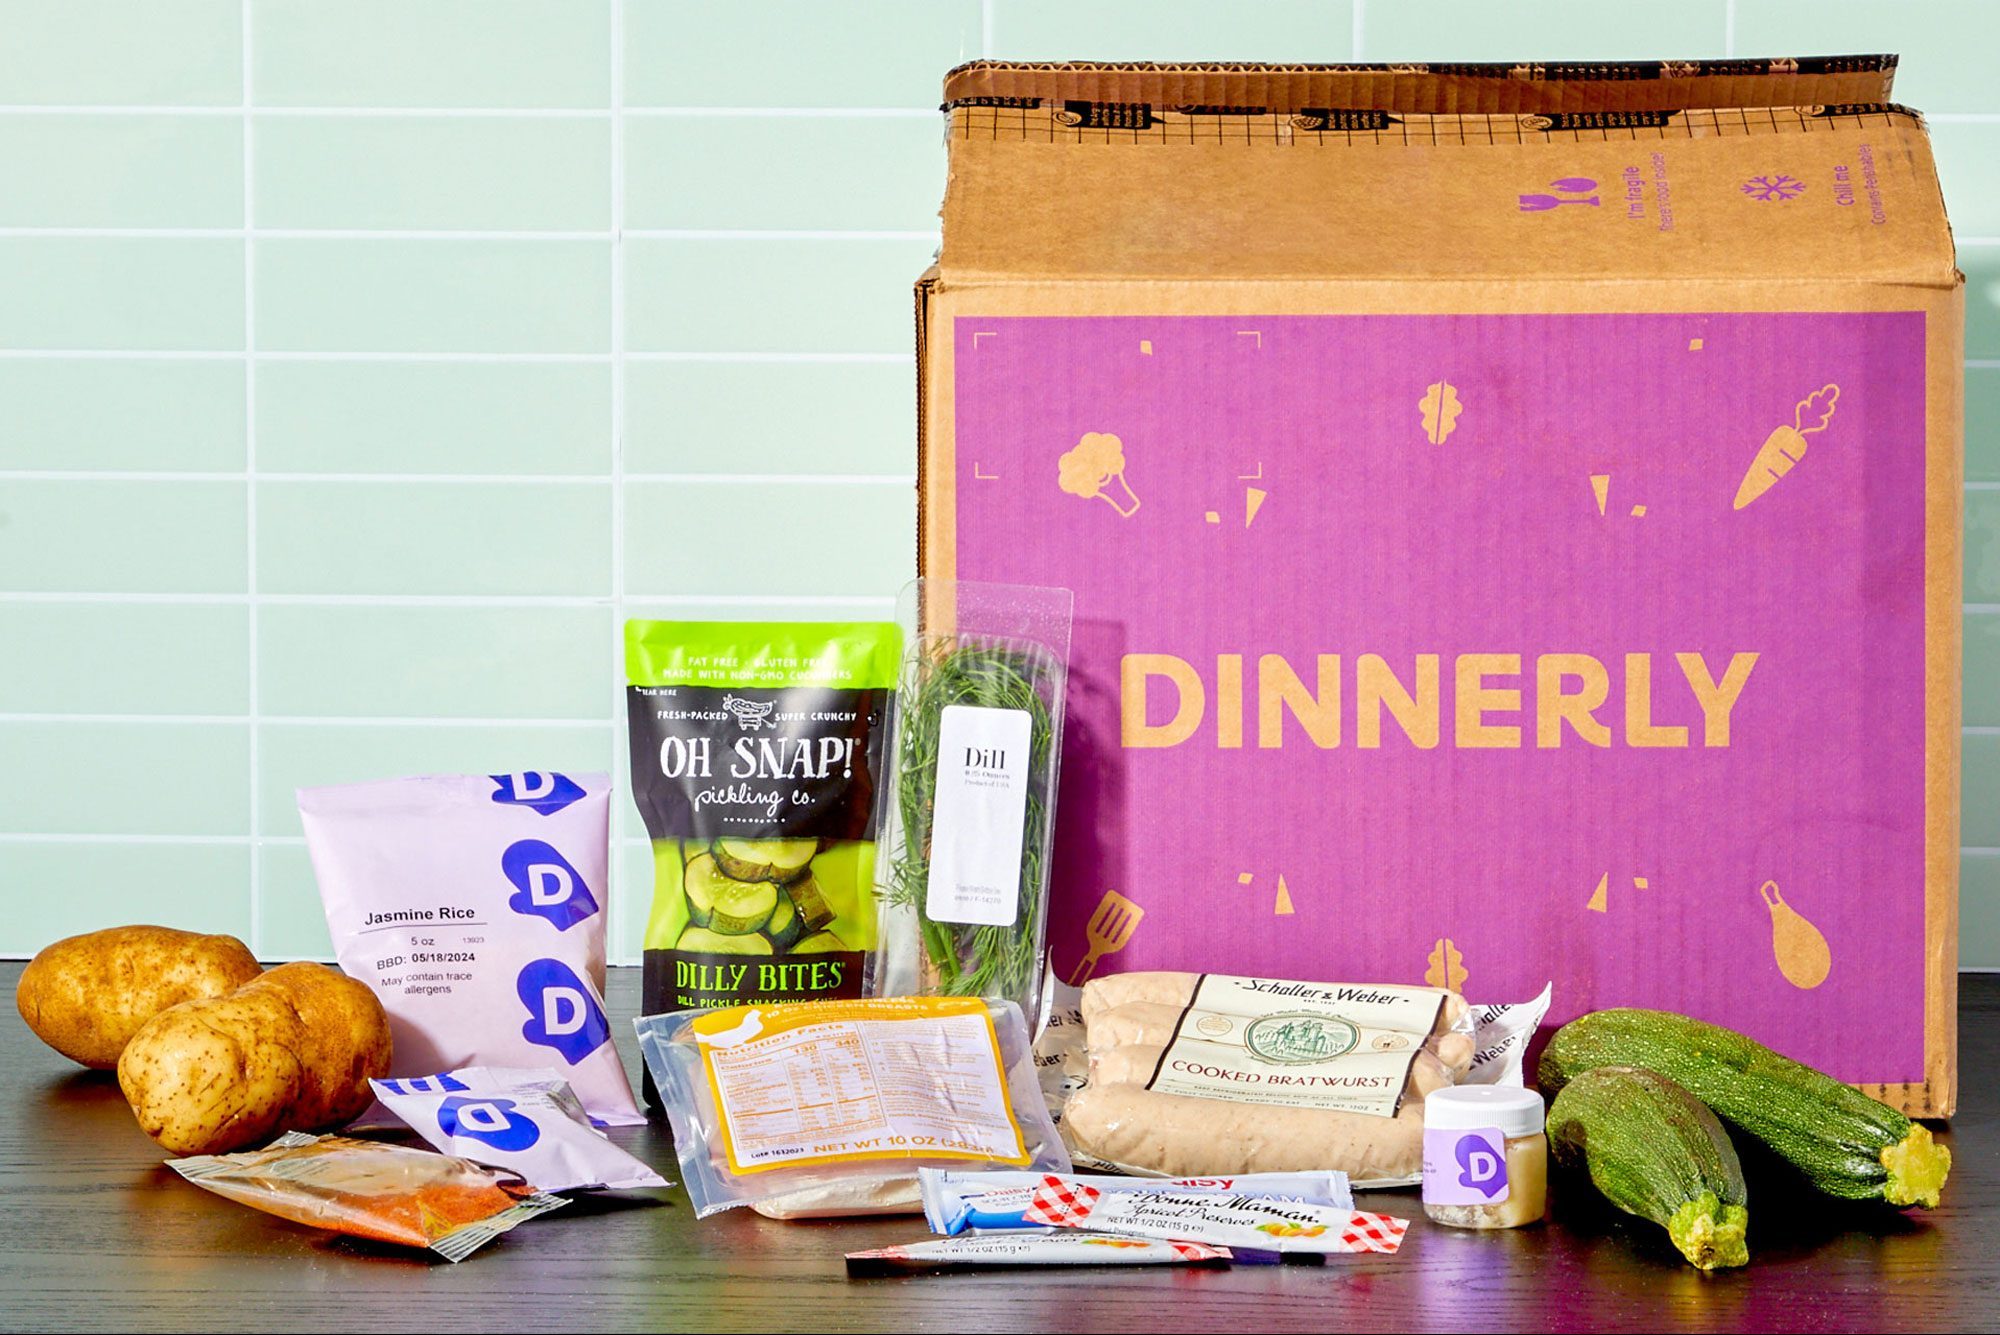 Plant-Based Meal Kits Could Be the Next Big Thing in Food